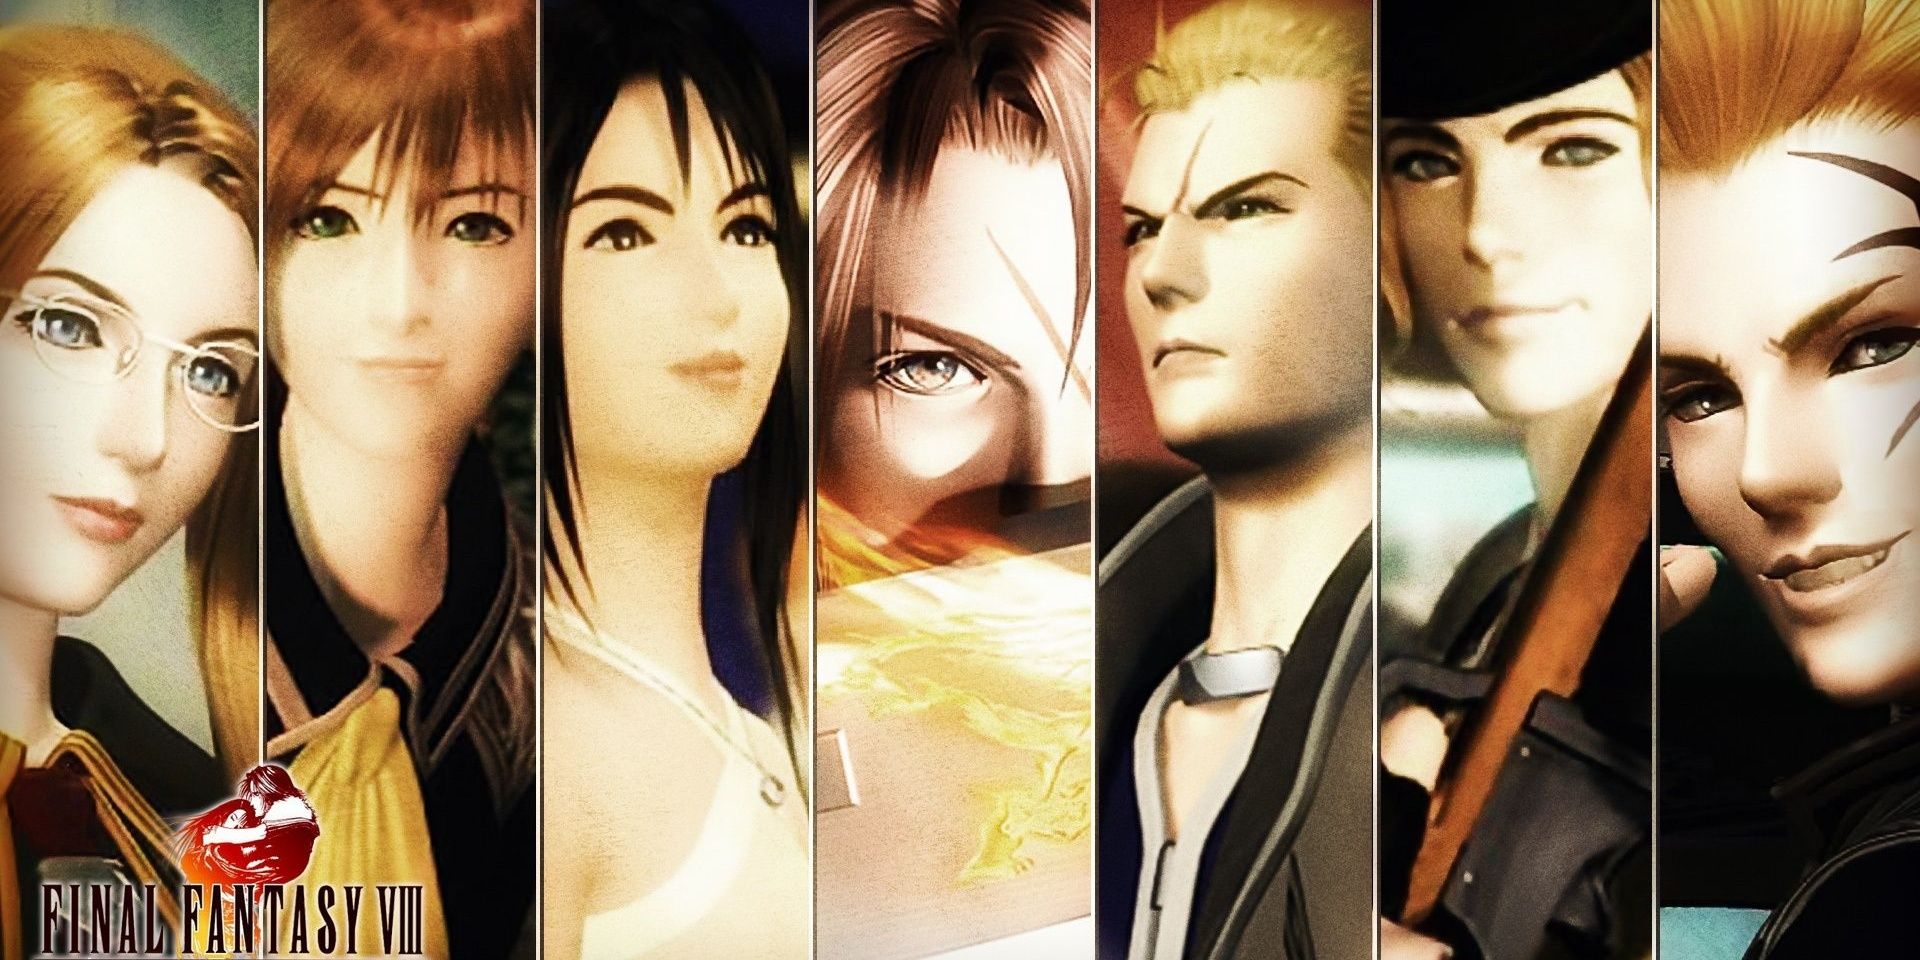 The Final Fantasy VIII party